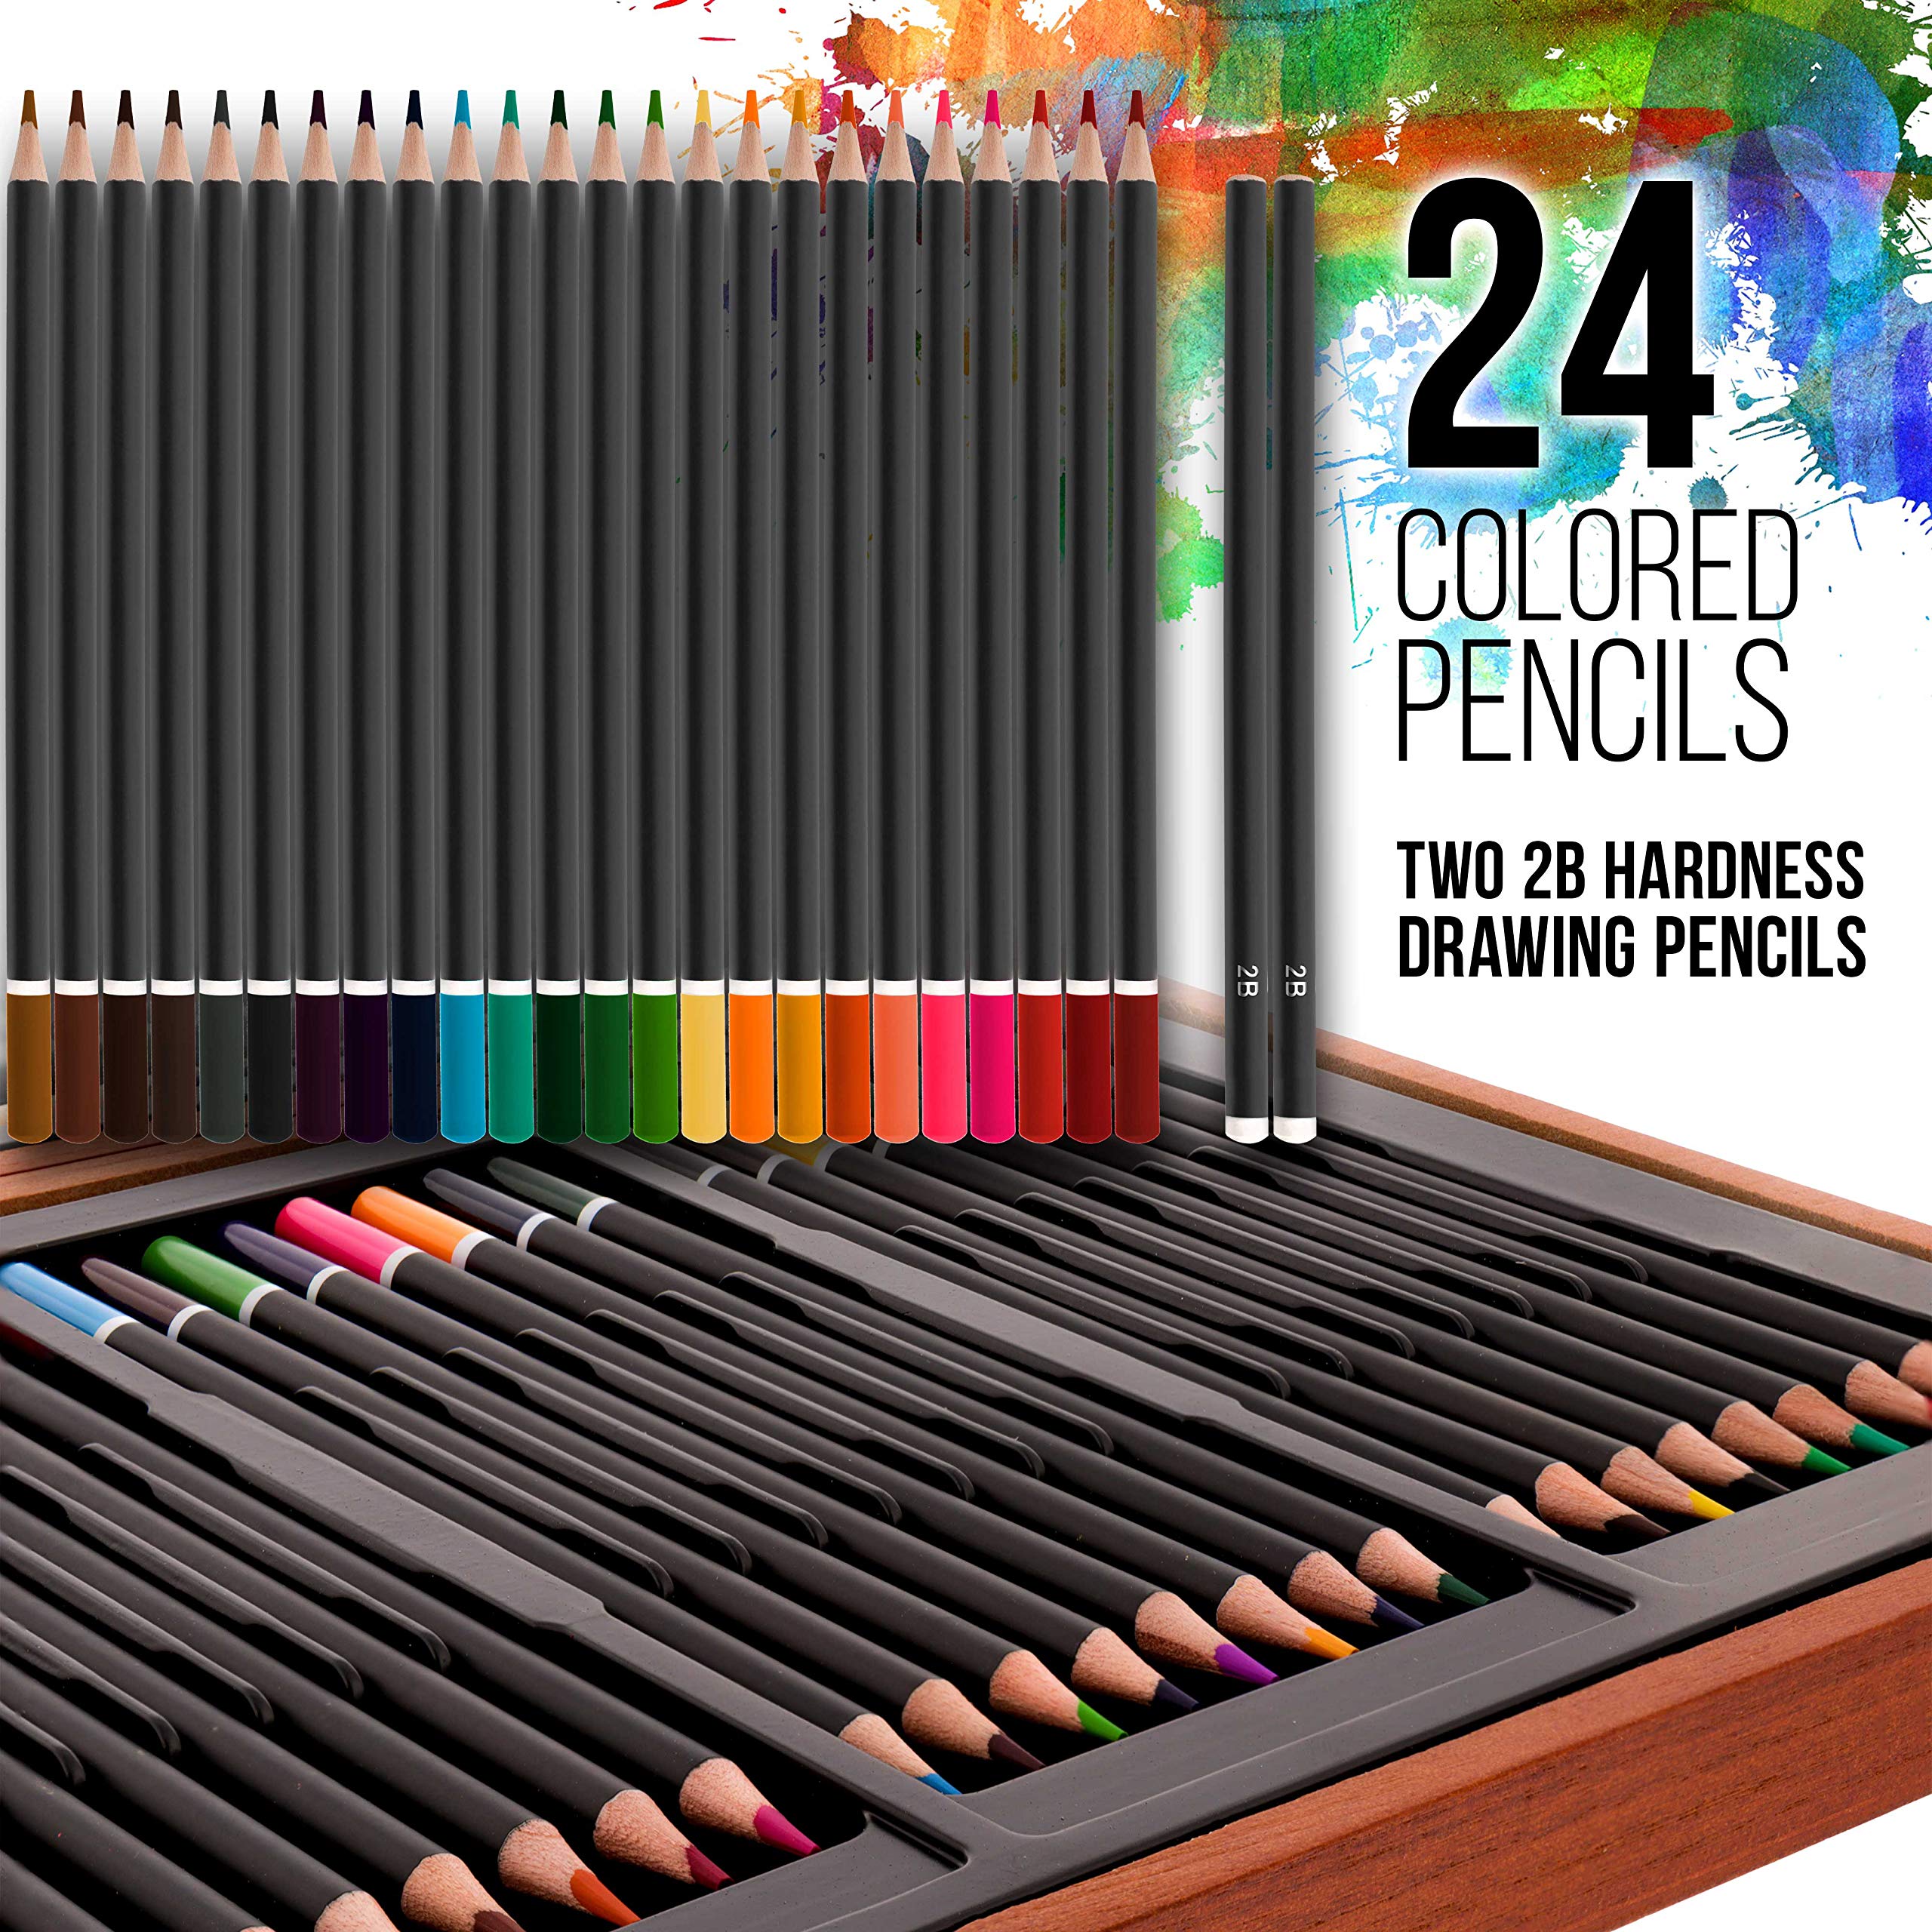 U.S. Art Supply 103-Piece Deluxe Art Creativity Set in Wooden Case with Wood Desk Easel - Artist Painting Pad, 2 Sketch Pads, 24 Watercolor Paint Colors, 17 Brushes, 24 Colored Pencils, Drawing Kit